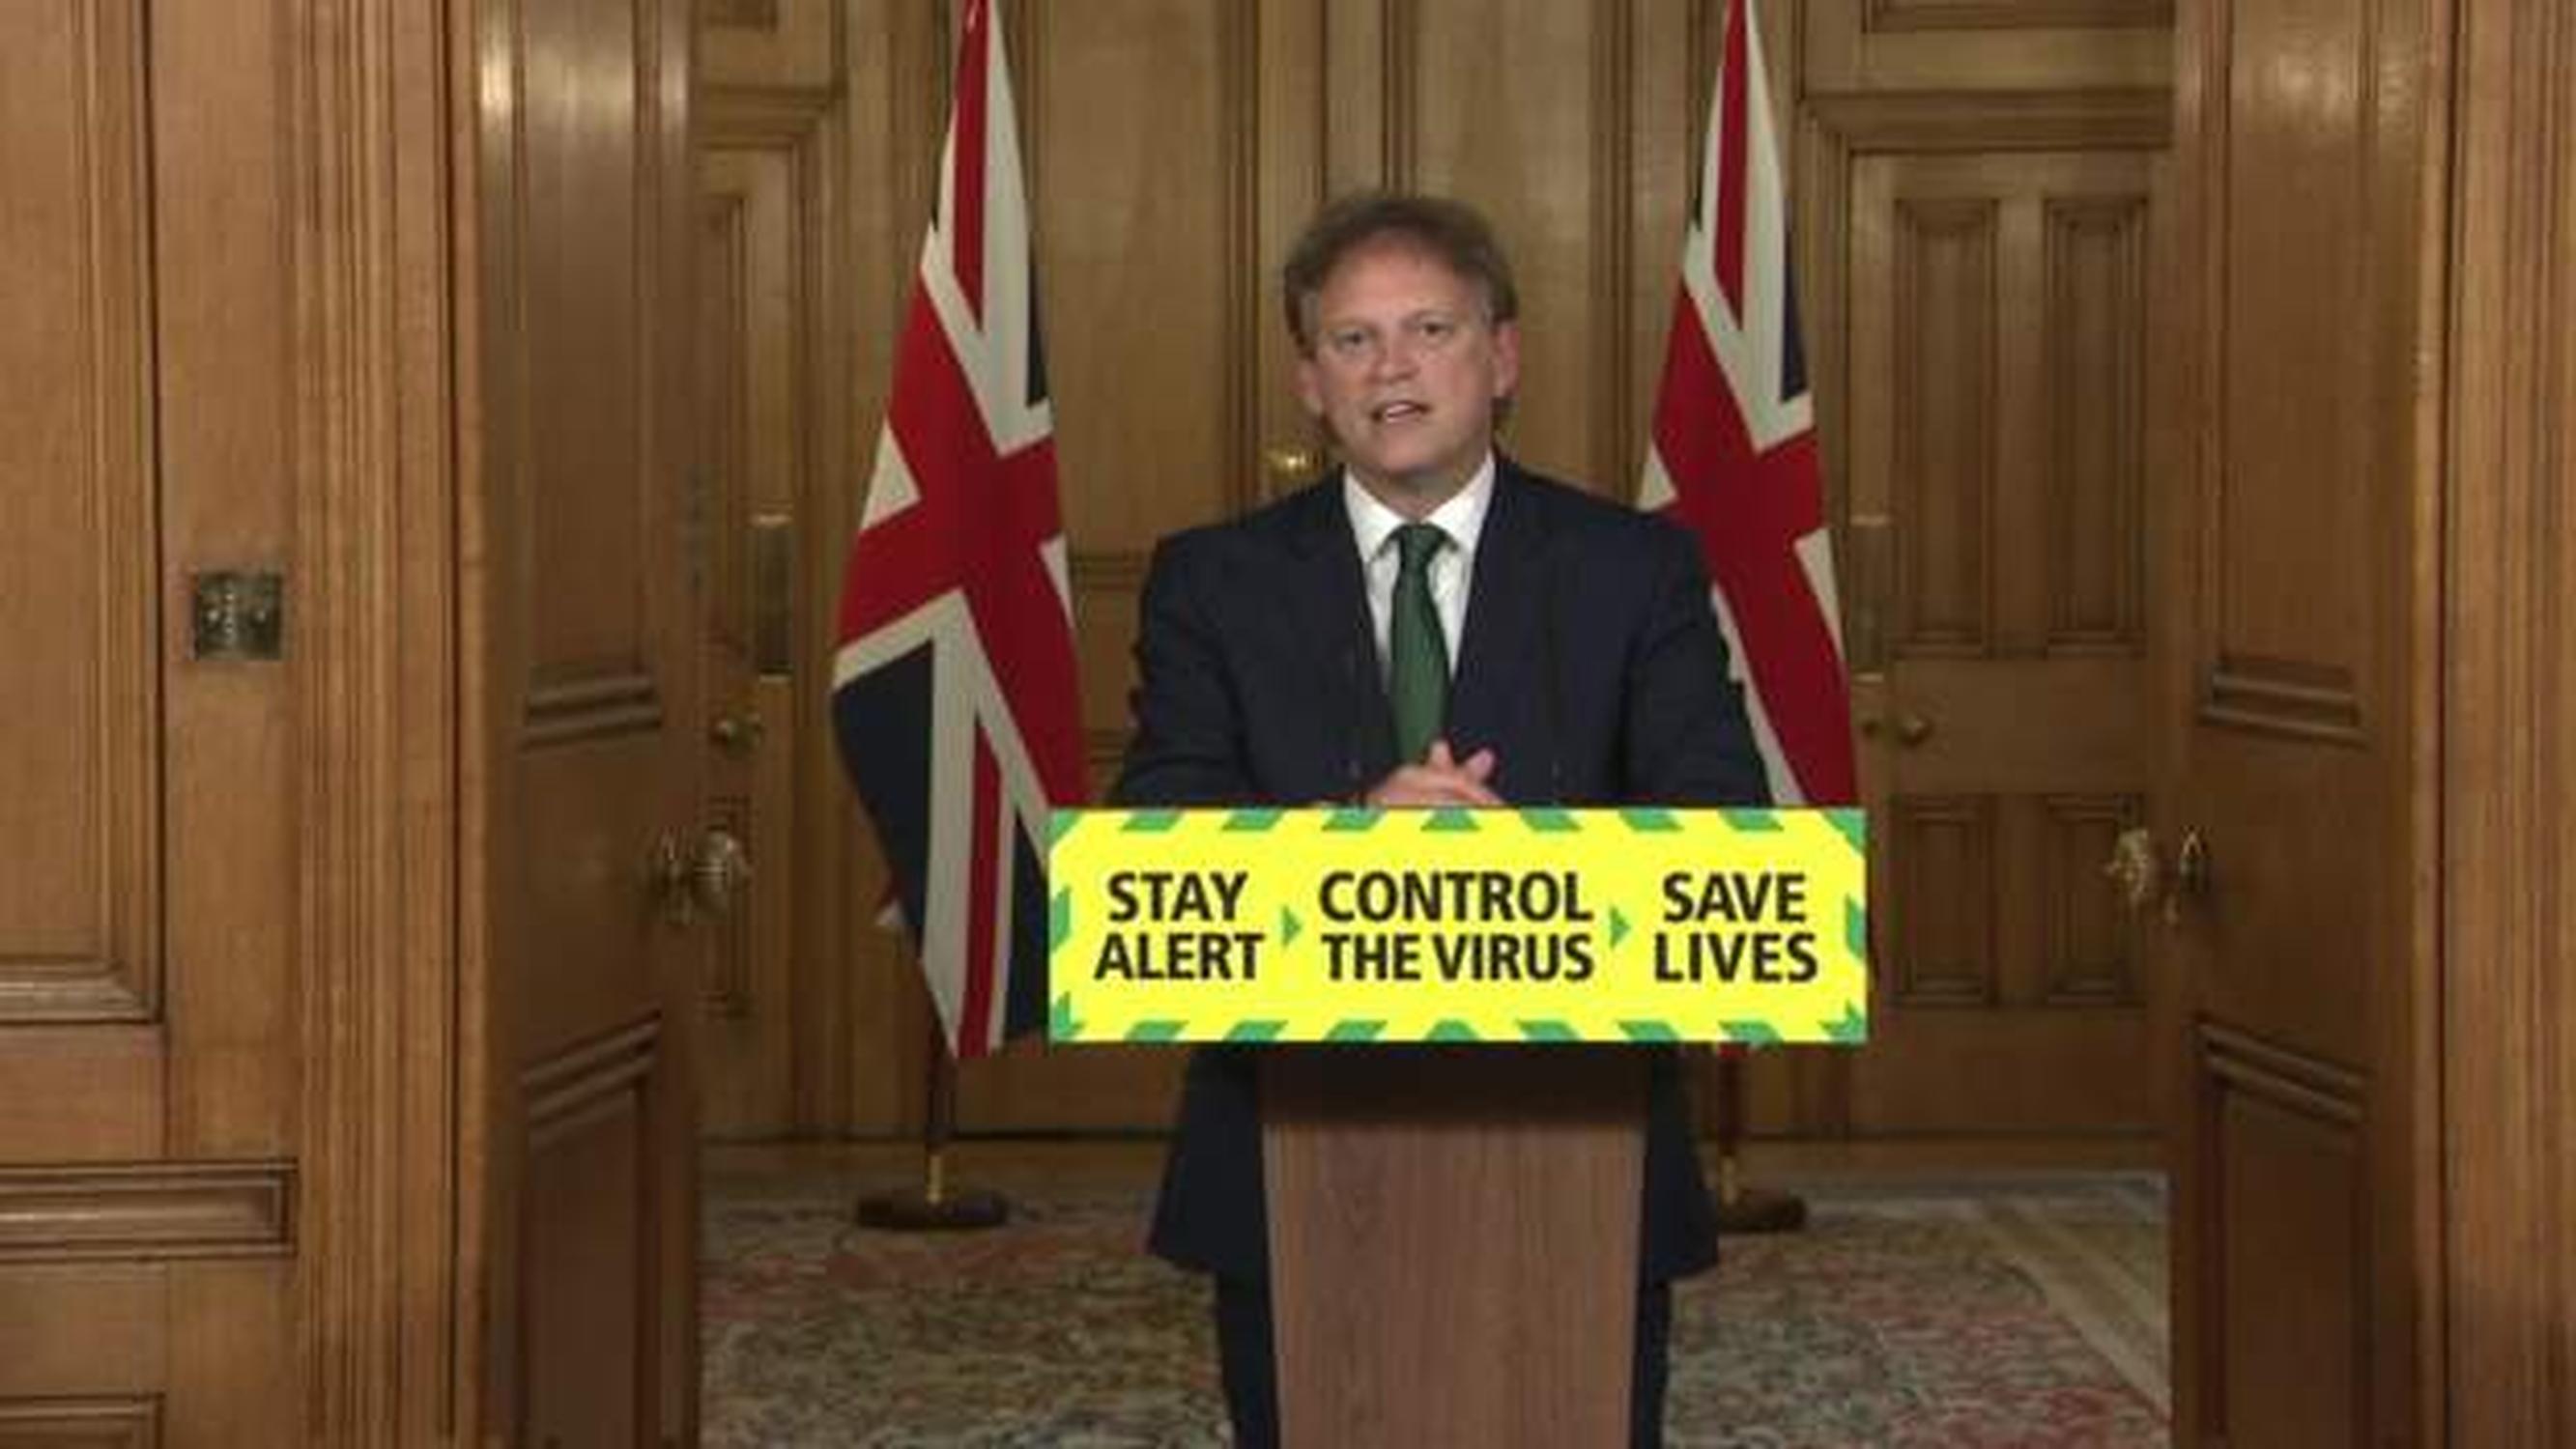 Transport Secretary Grant Shapps announced the aviation initiatives at 10 Downing Street